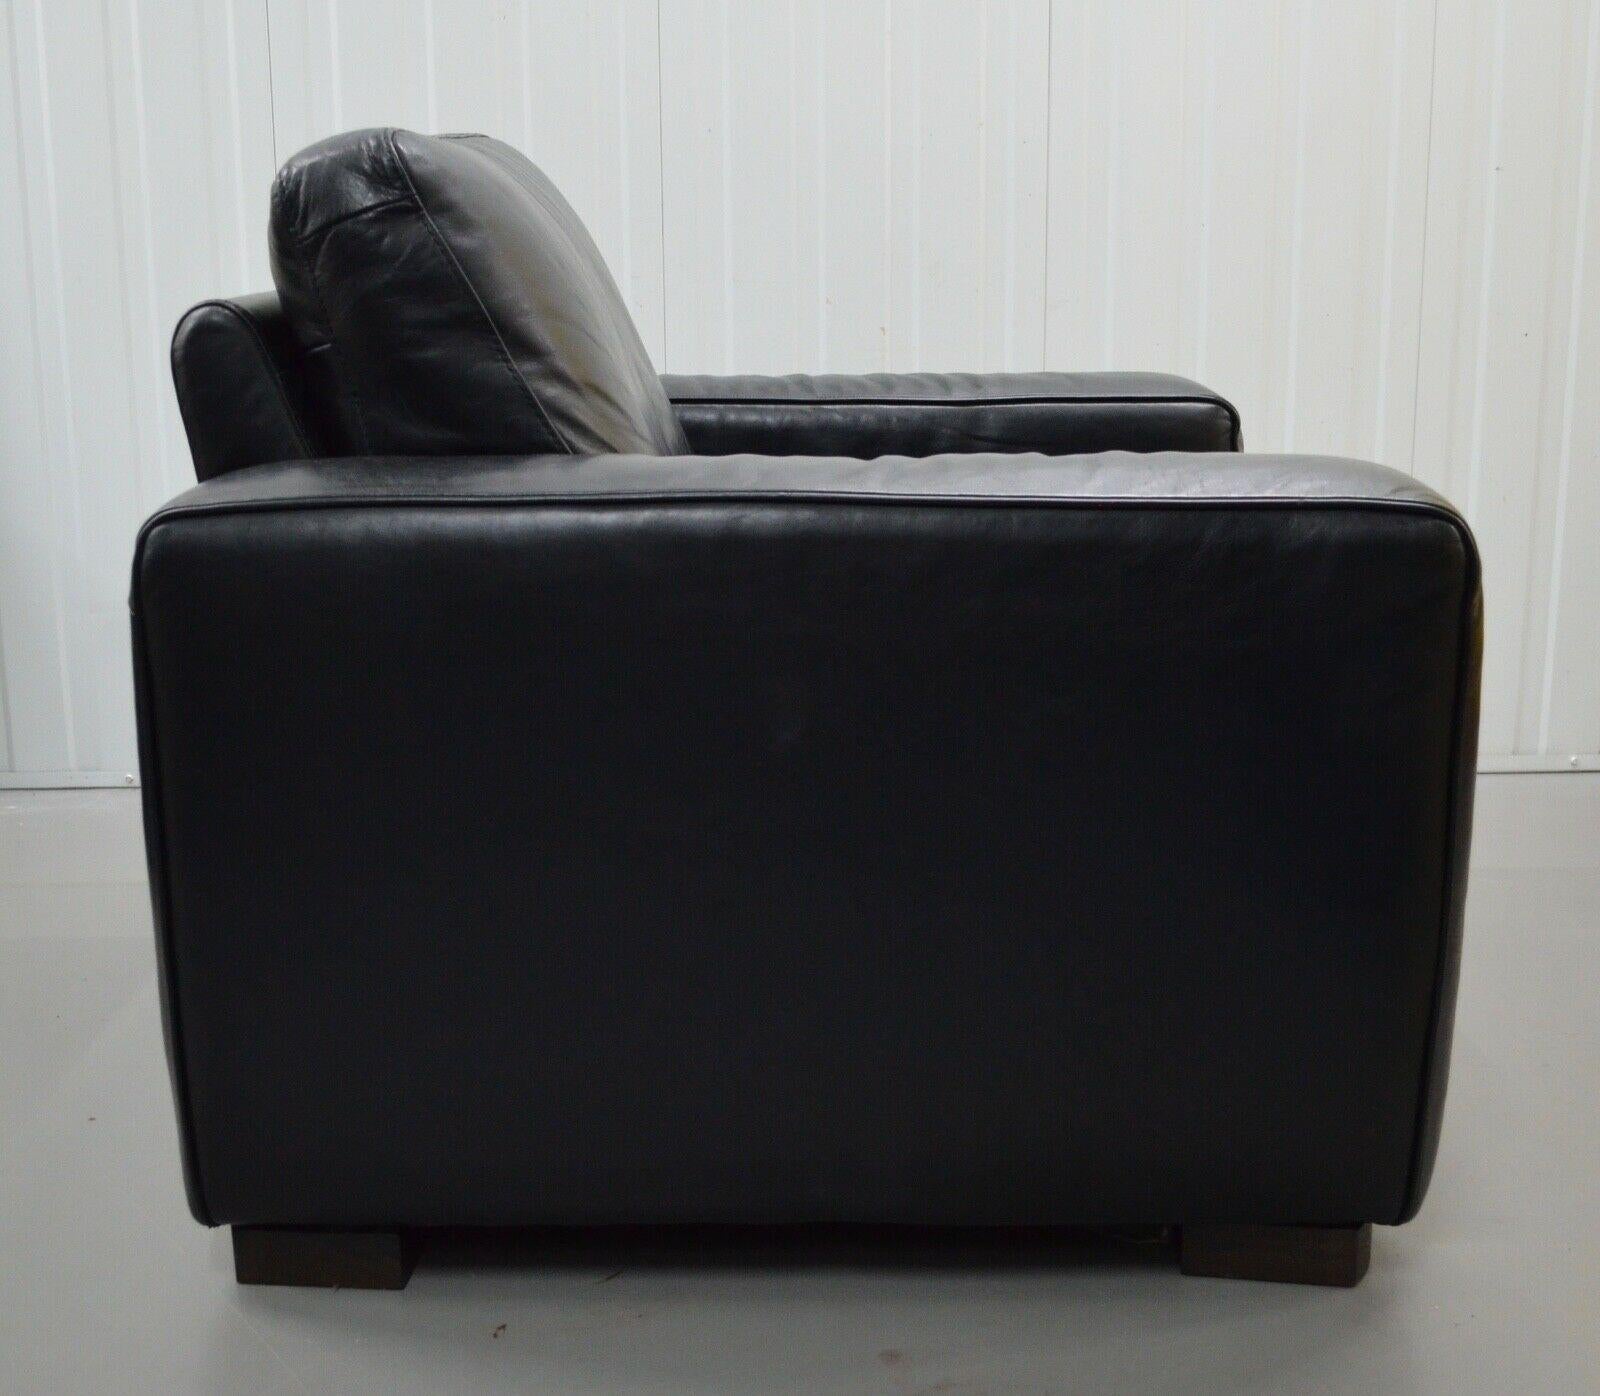 1 of 2 FINE NATUZZI BLACK LEATHER TWO SEATER SOFAS MATCING ARMCHAIR AVAILABLE For Sale 1